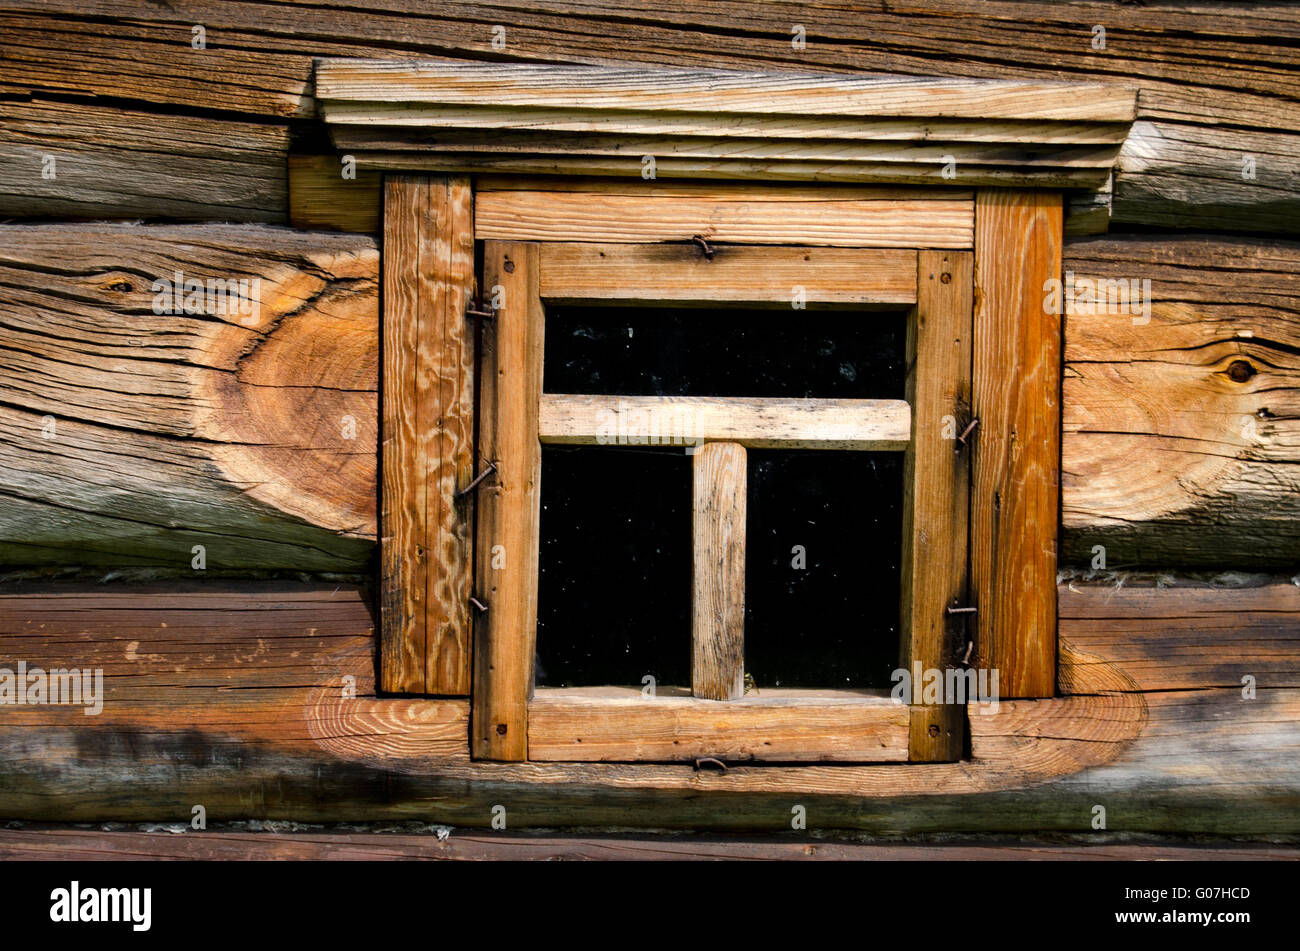 Window in the old wooden house Stock Photo